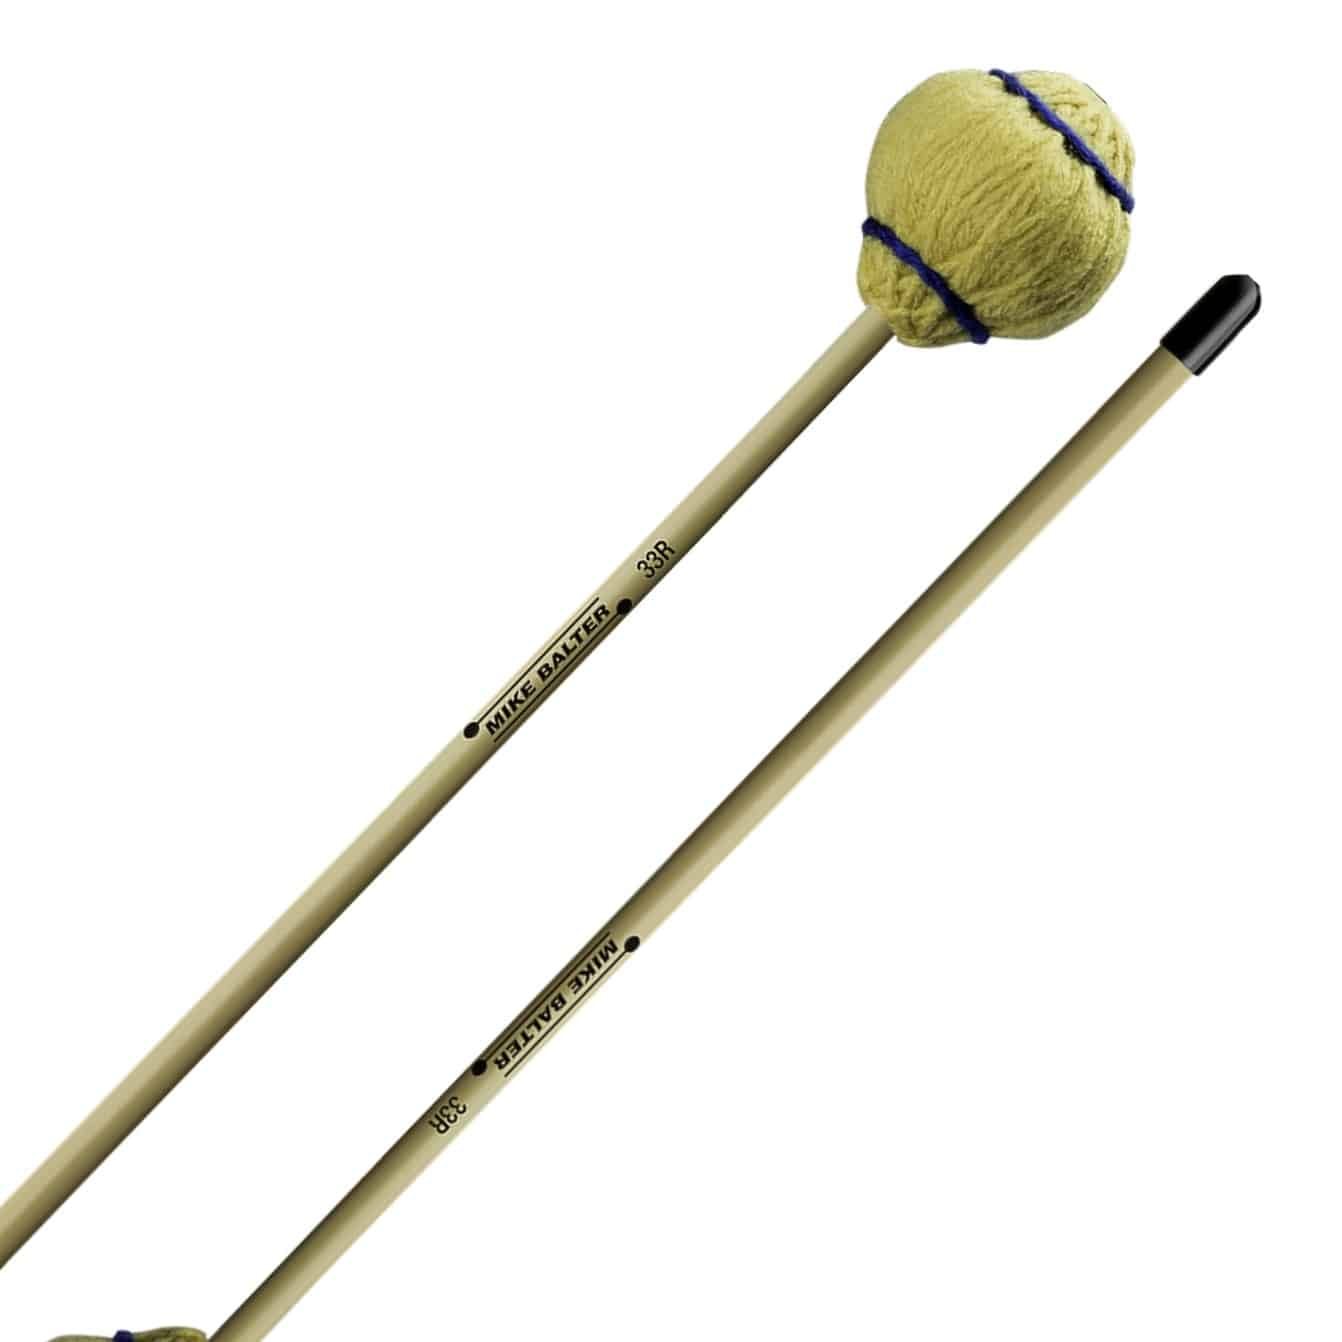 Balter 33 Wide Bar Soft Vibraphone Mallets - DISCONTINUED - last few pairs!